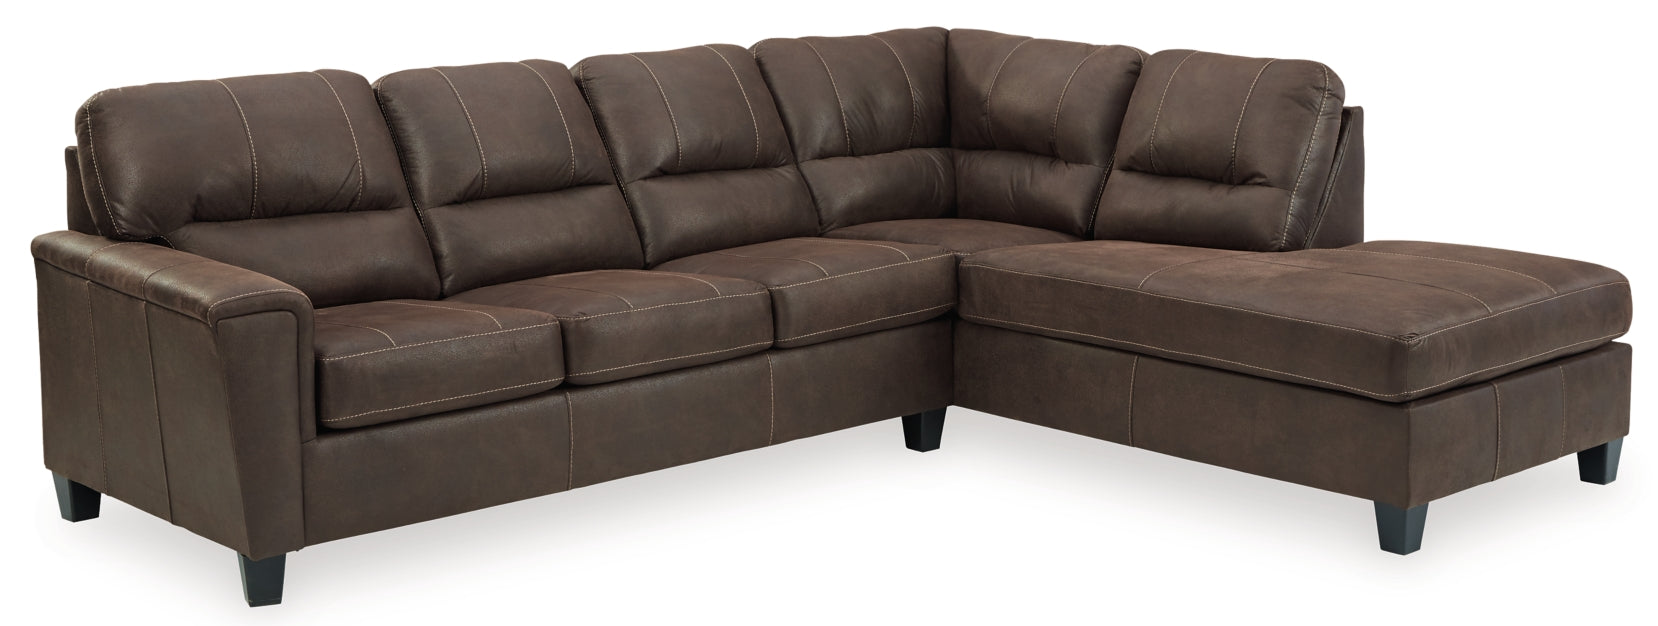 Navi 2-Piece Sectional with Ottoman - PKG007401 - furniture place usa